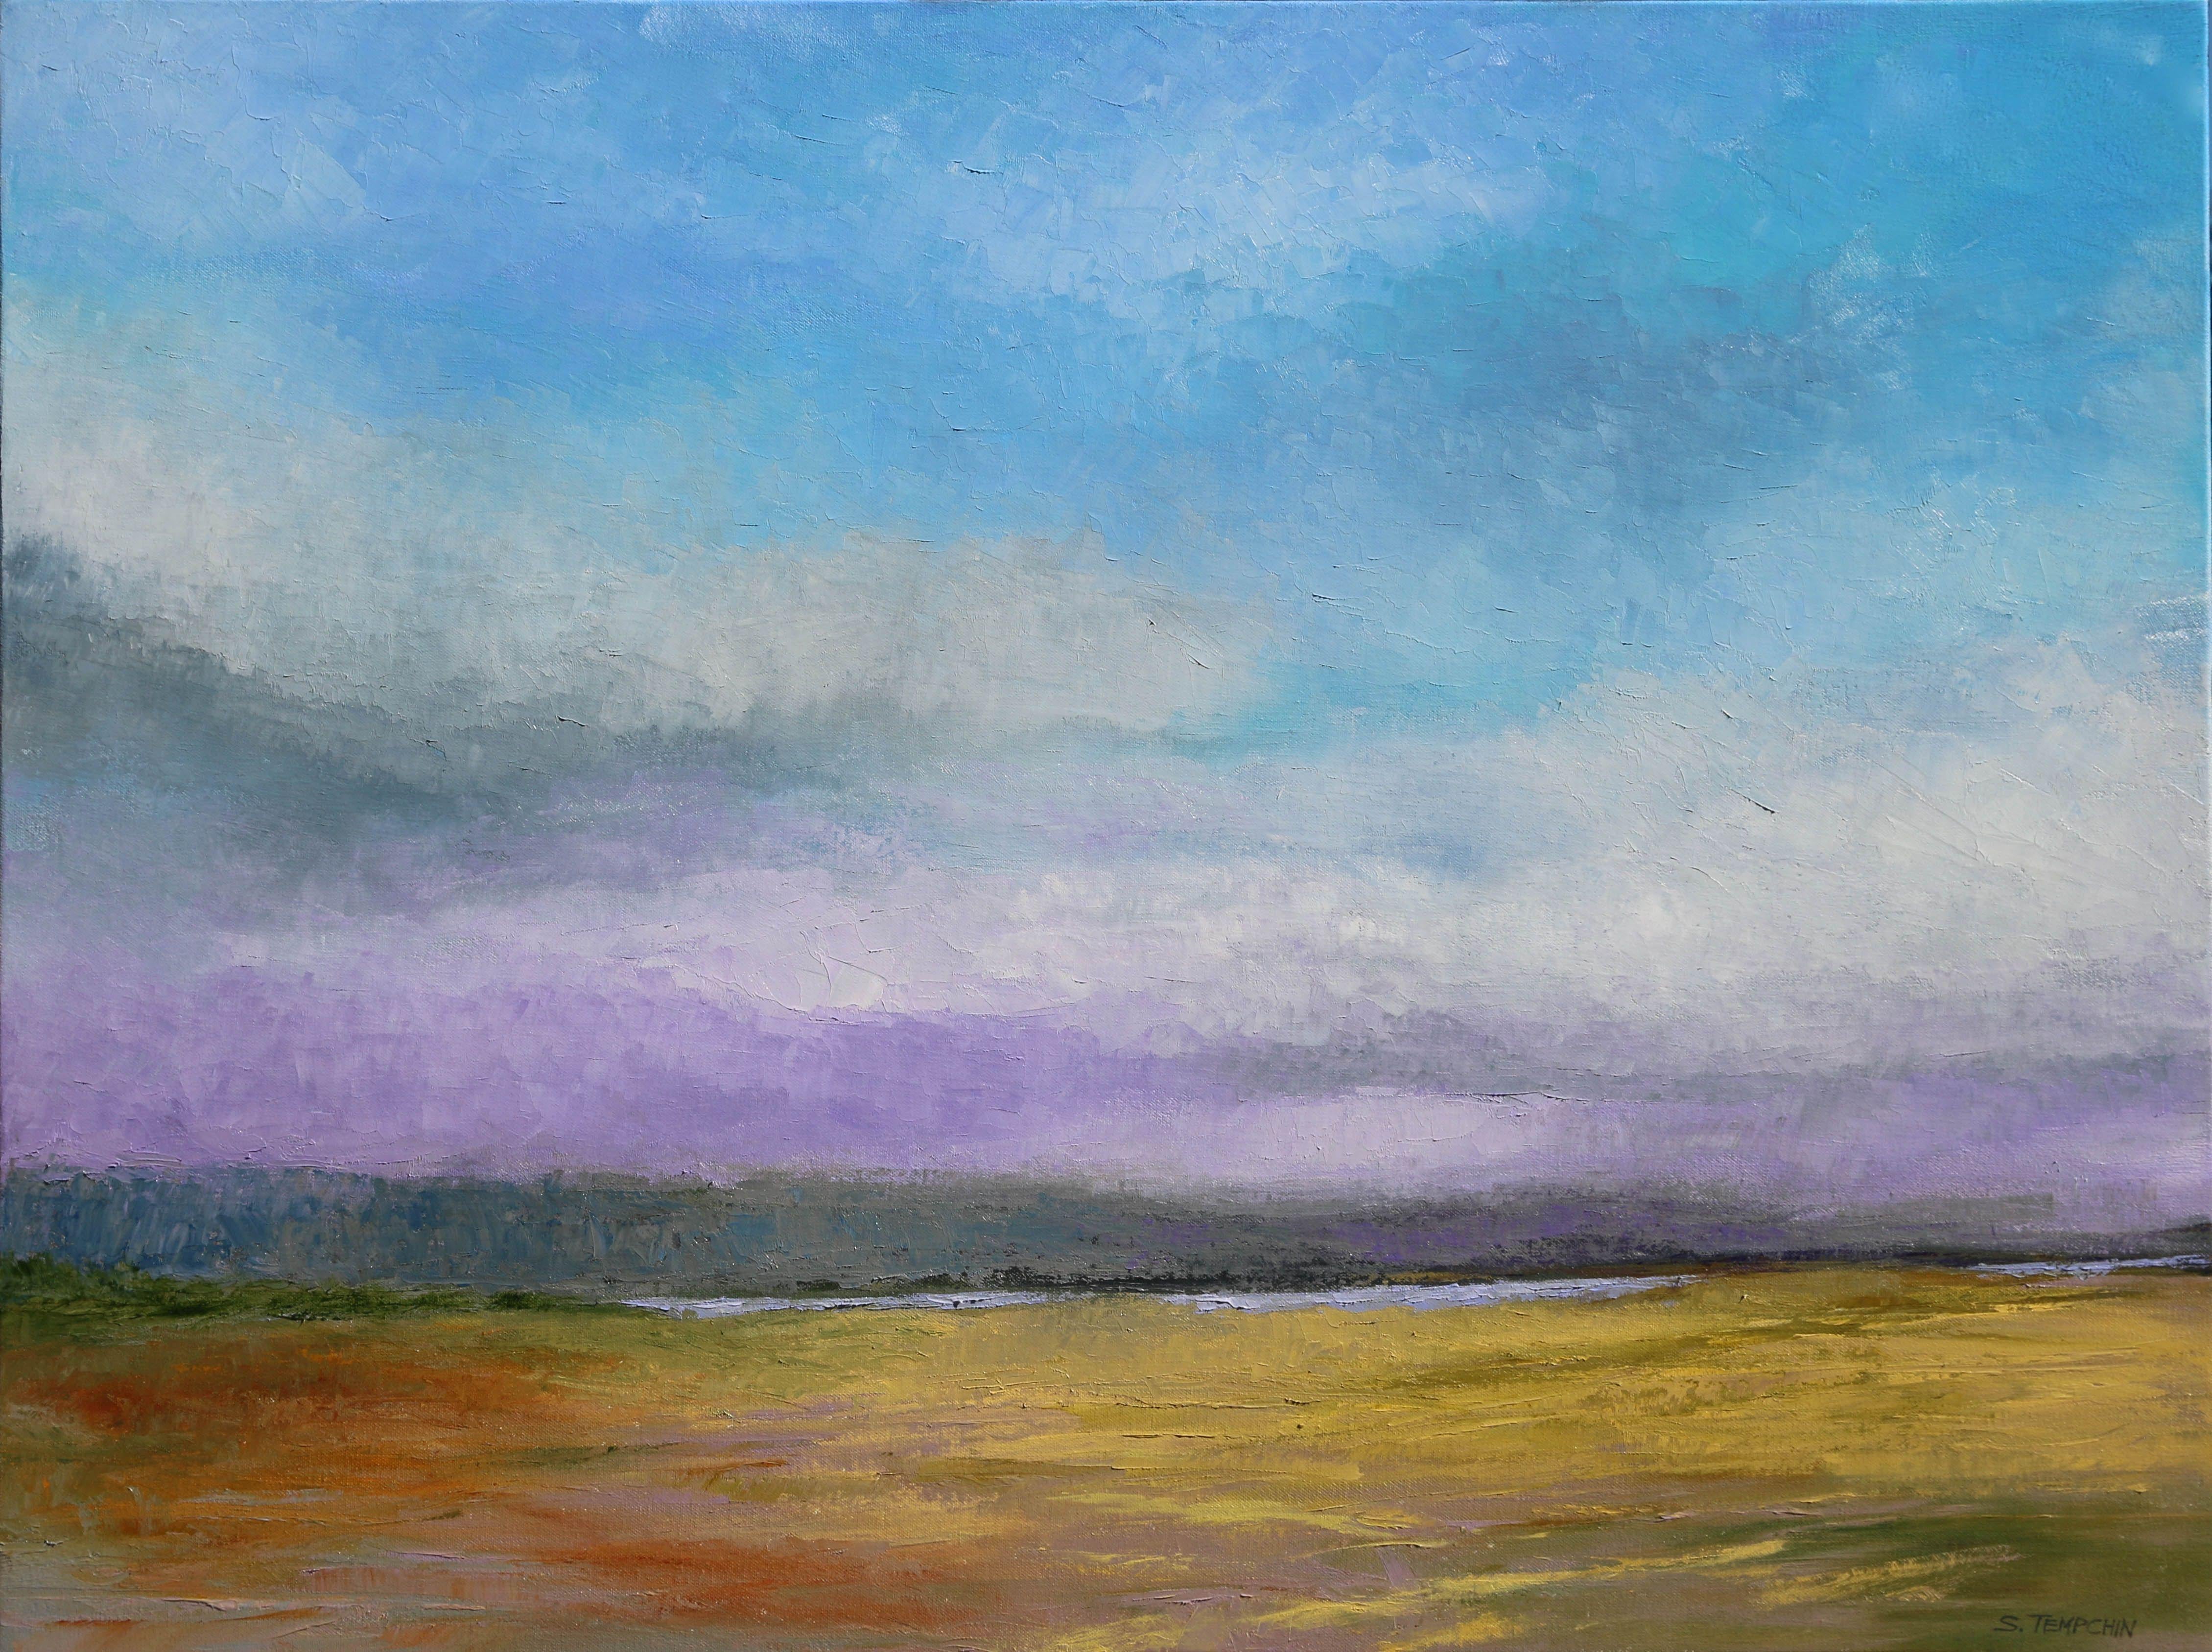 A moody,  clouded sky dominates this view across golden plains toward distant hills and a barely glimpsed river.  :: Painting :: Contemporary :: This piece comes with an official certificate of authenticity signed by the artist :: Ready to Hang: Yes